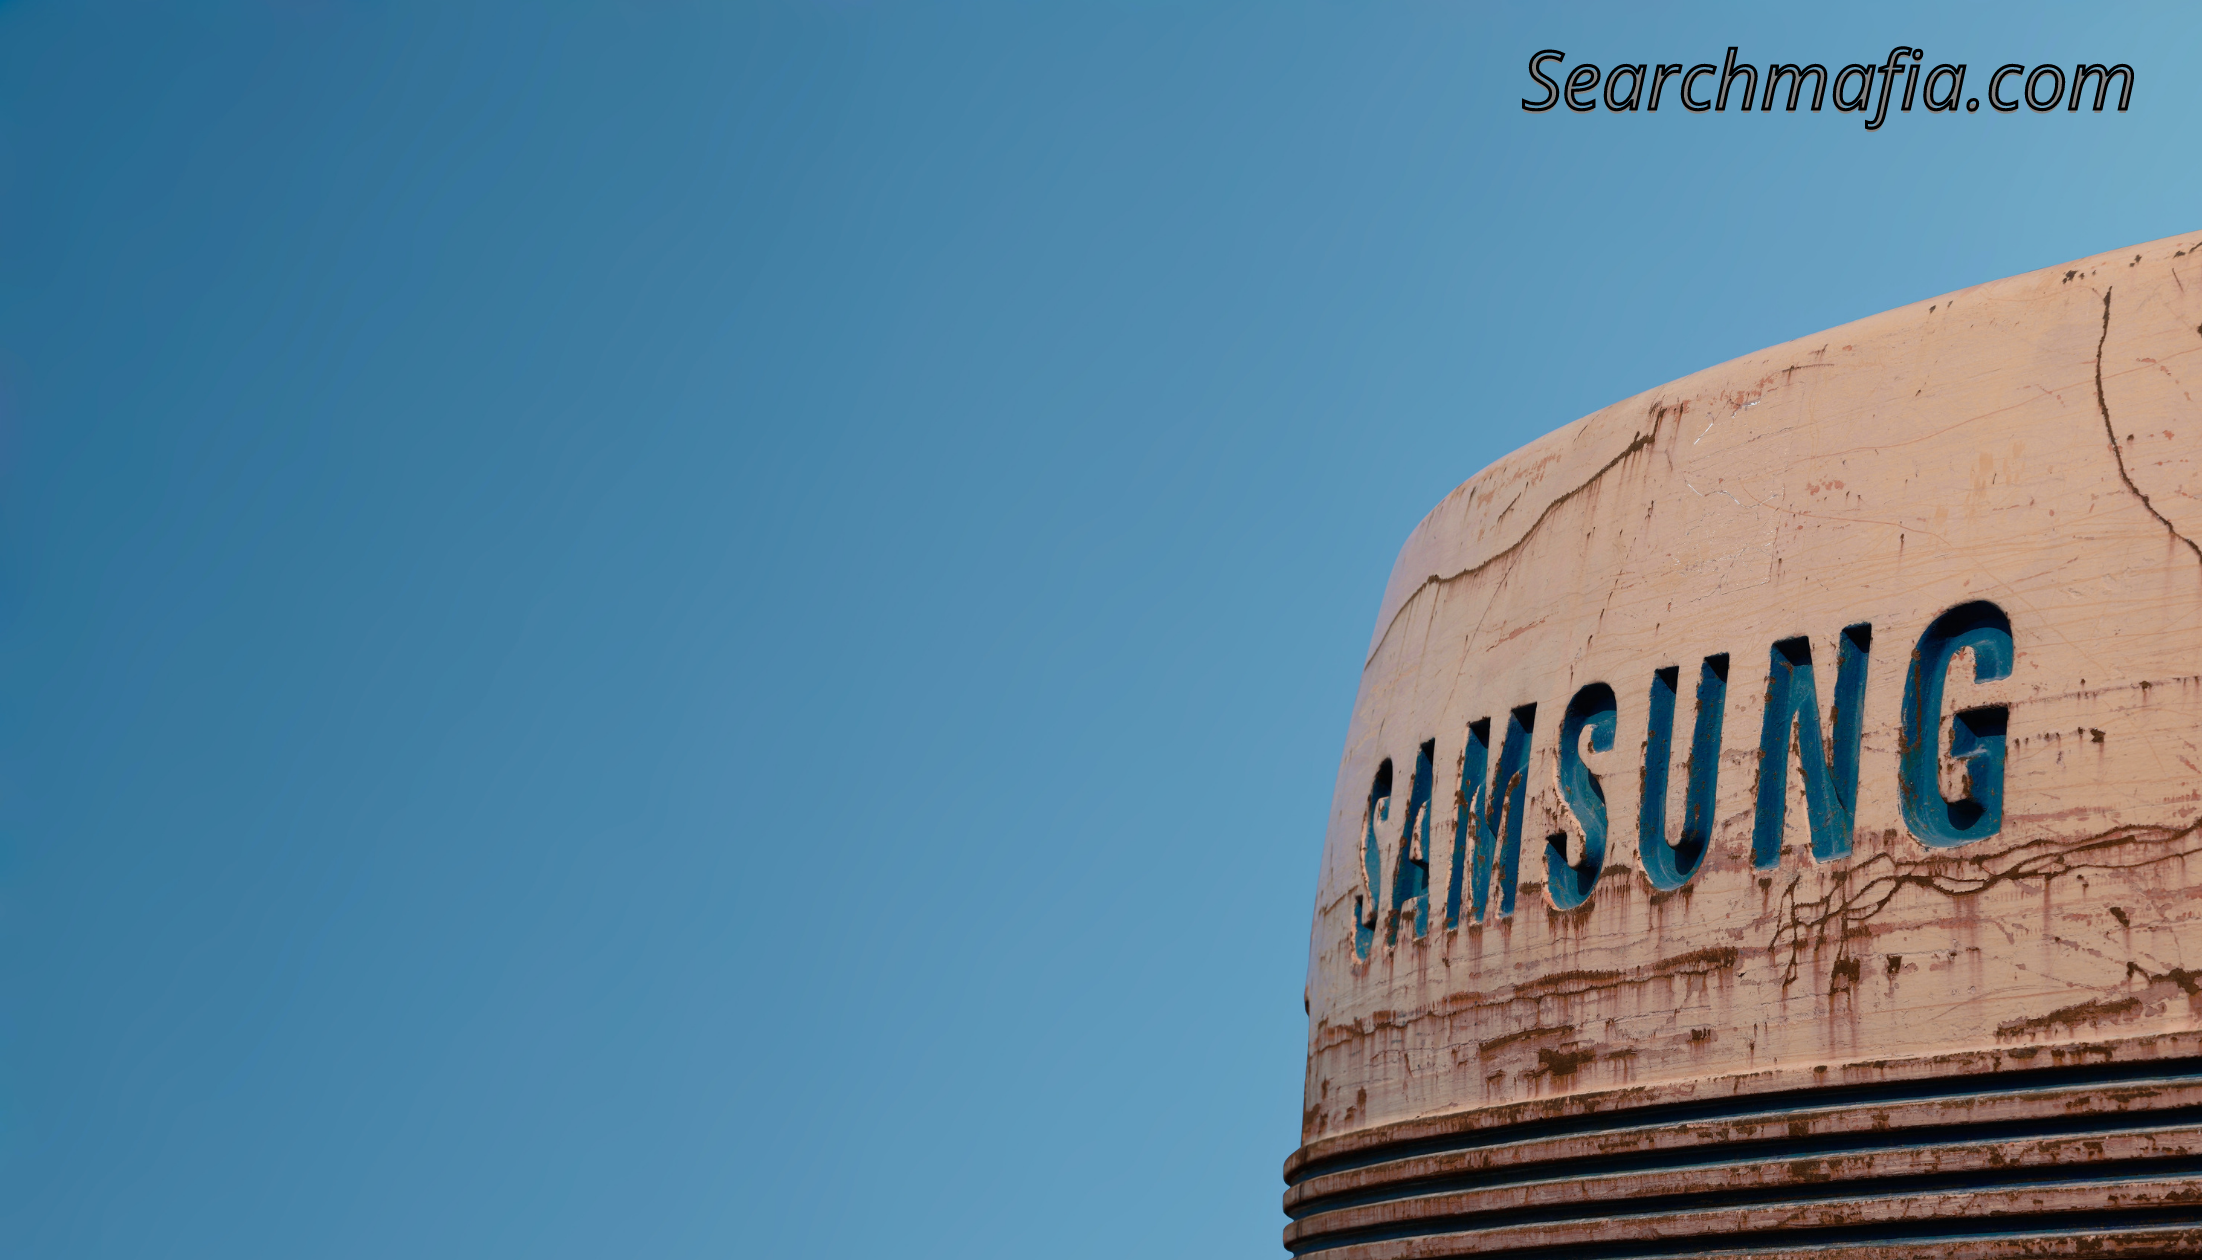 Samsung Service Center Aluva,Phone number,Email ID